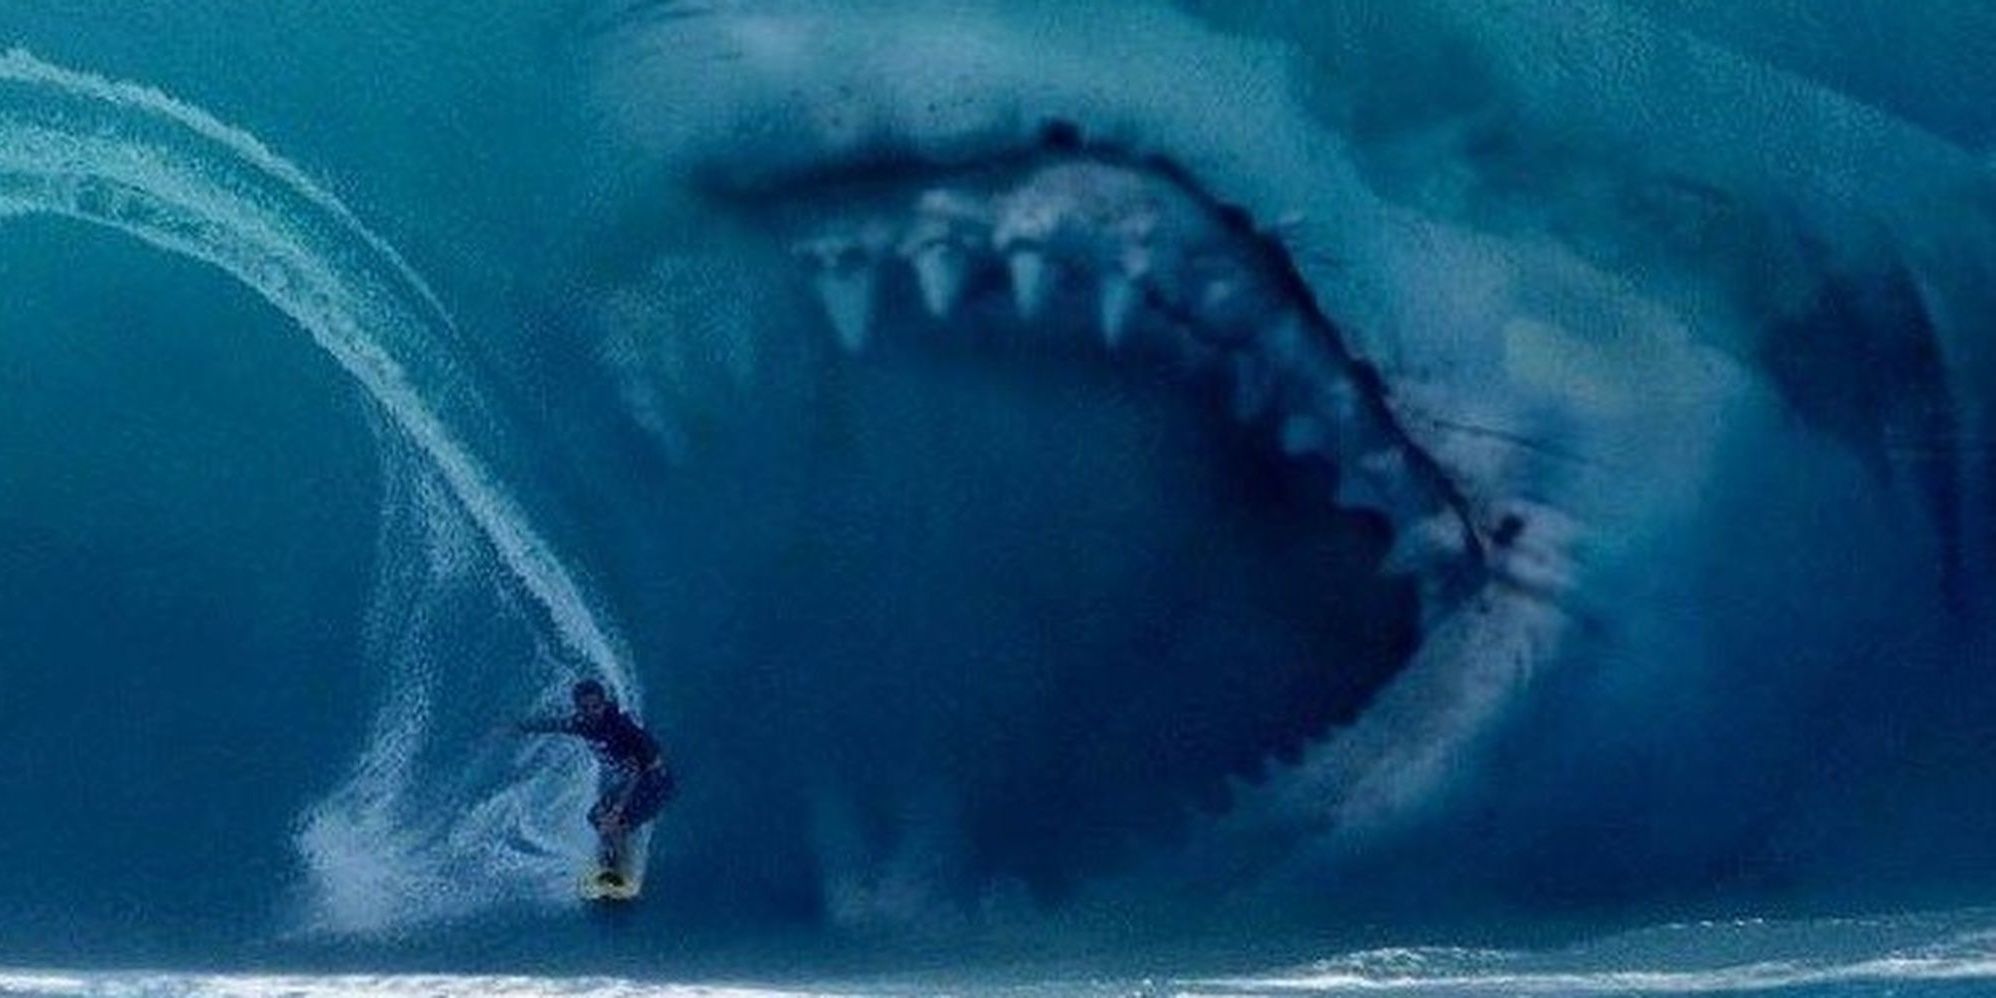 Screenshot from the Meg of the Megalodon about to eat a surfer